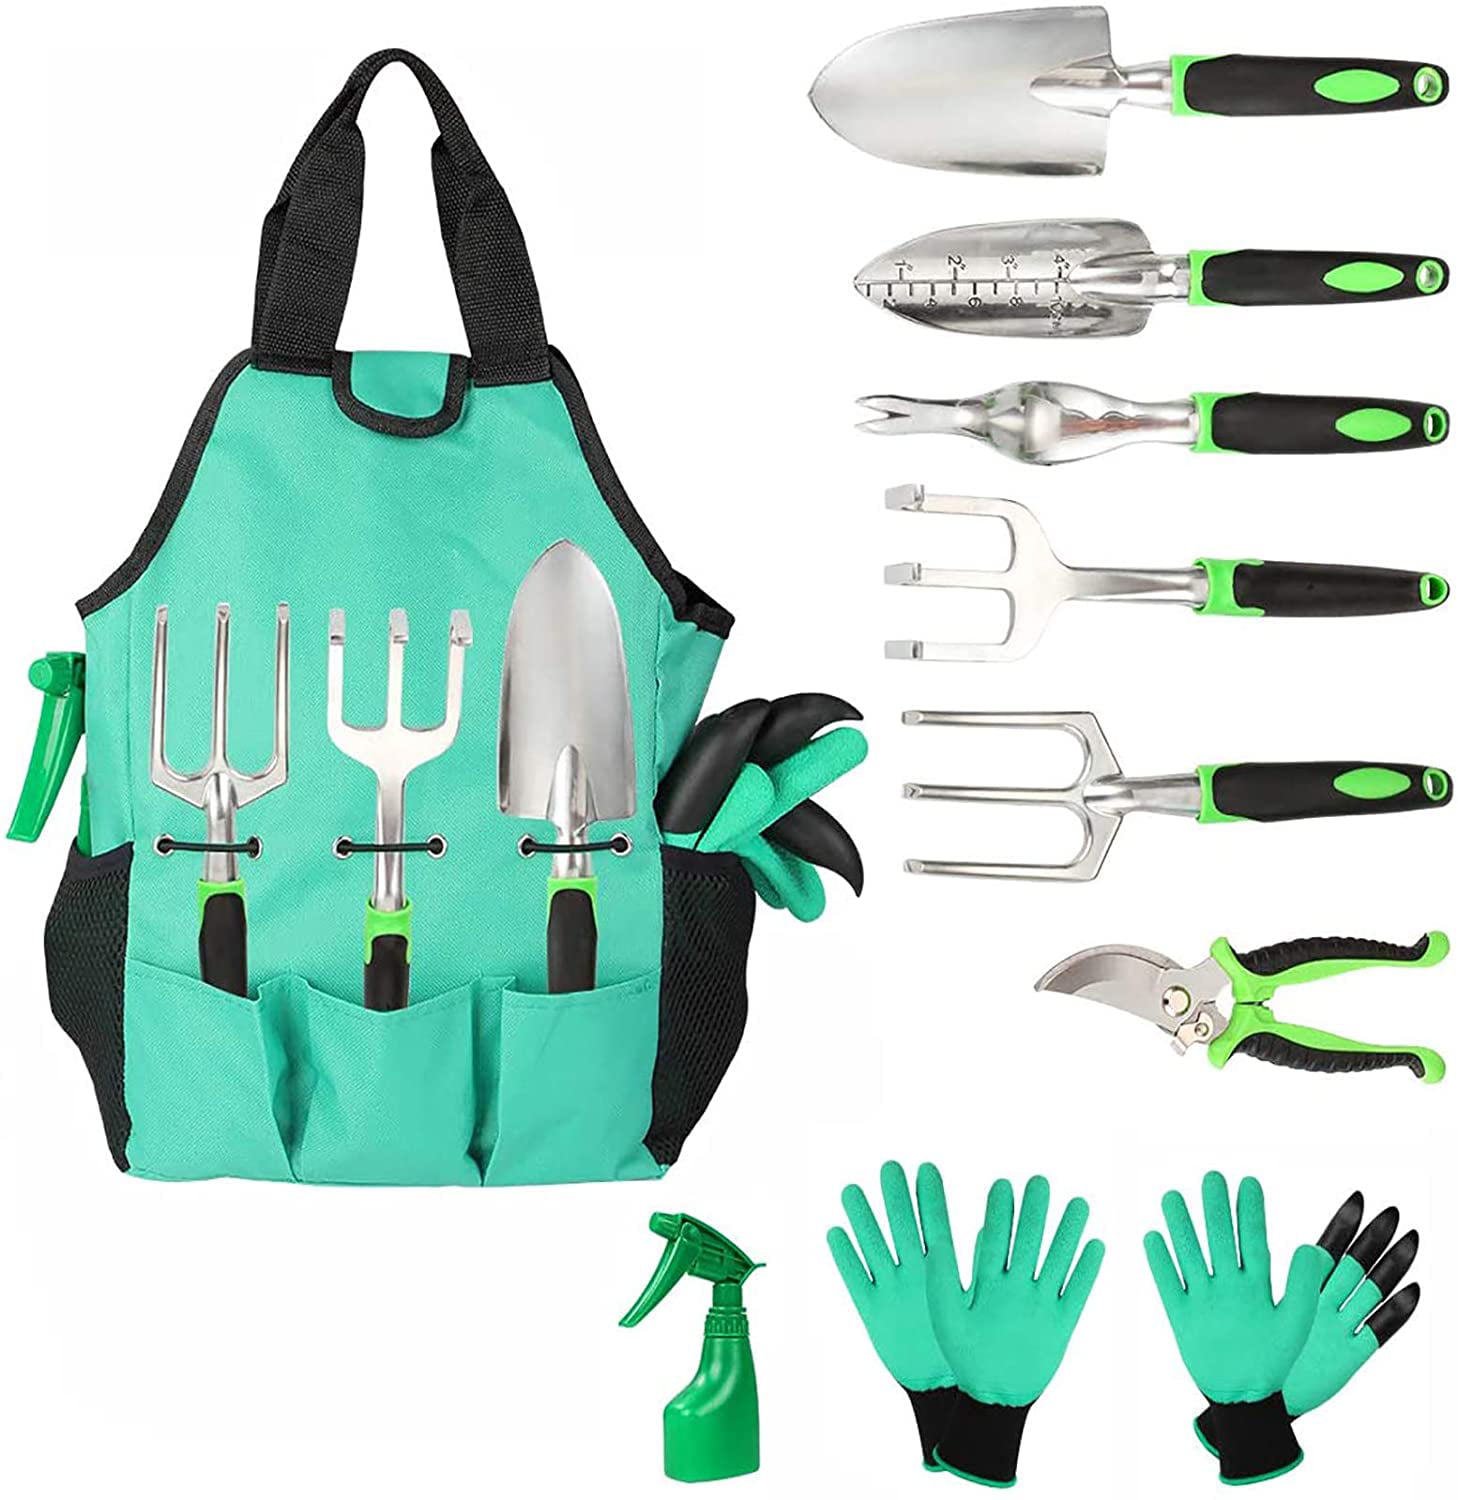 PUELDU Garden Tool Set,6 Pcs Heavy Duty Hand Tool Kit with Storage Tote,Transplanting Mat,Kneeling Pad,Digging Claw Gardening Gloves,Gardening Gifts for Women/Parent